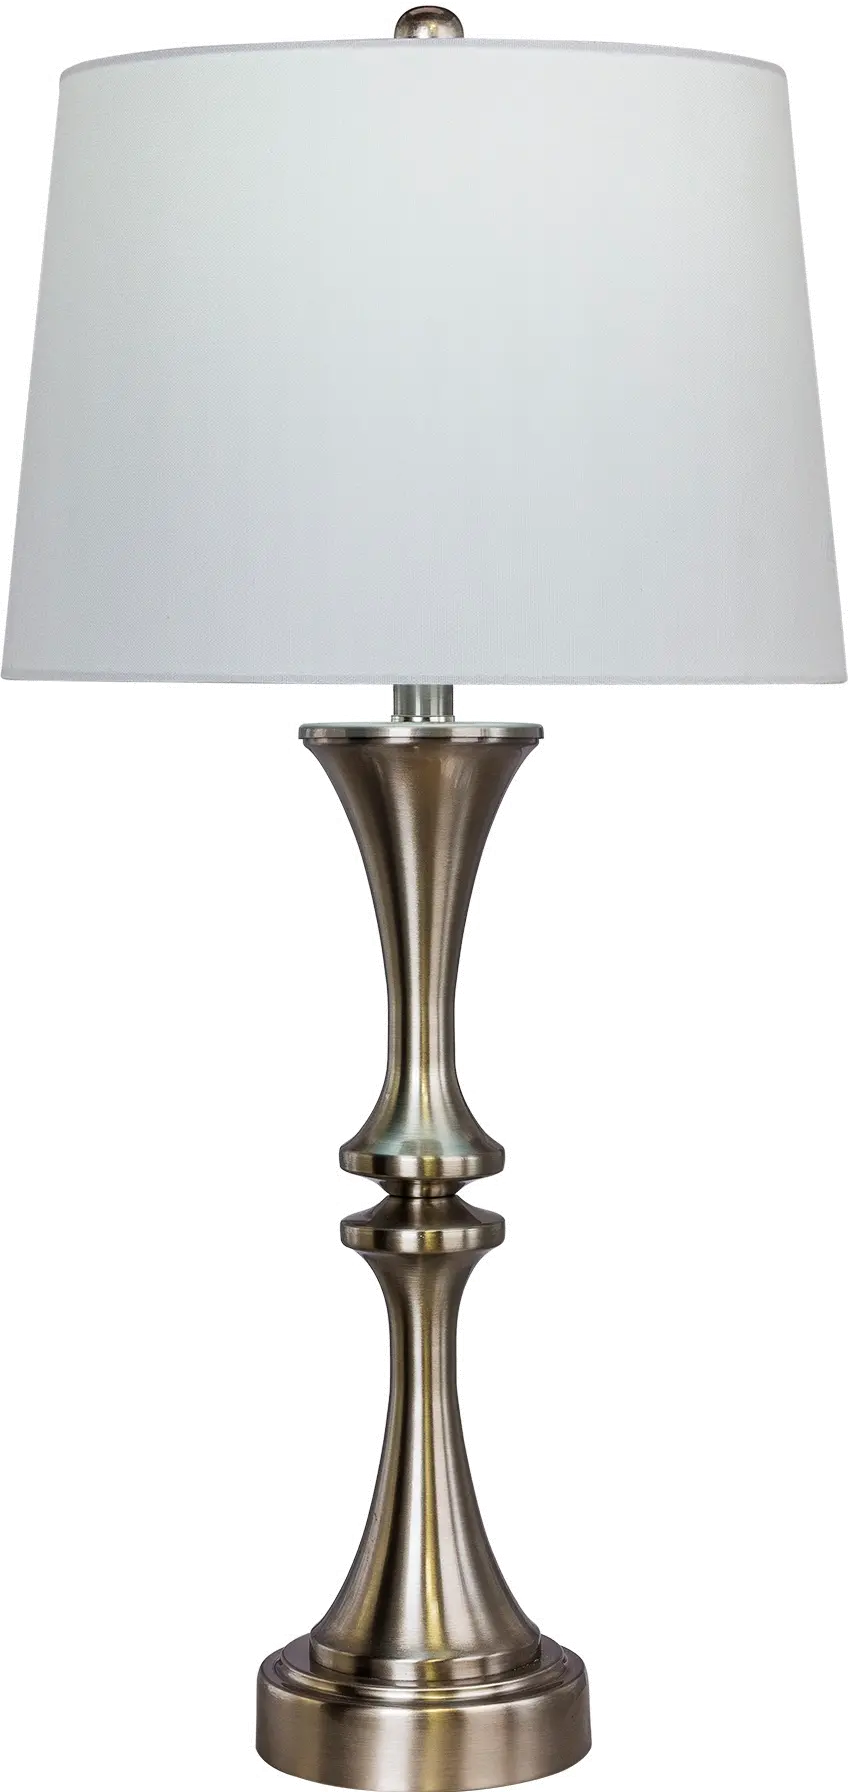 Brushed Steel Metal Table Lamp with USB Port